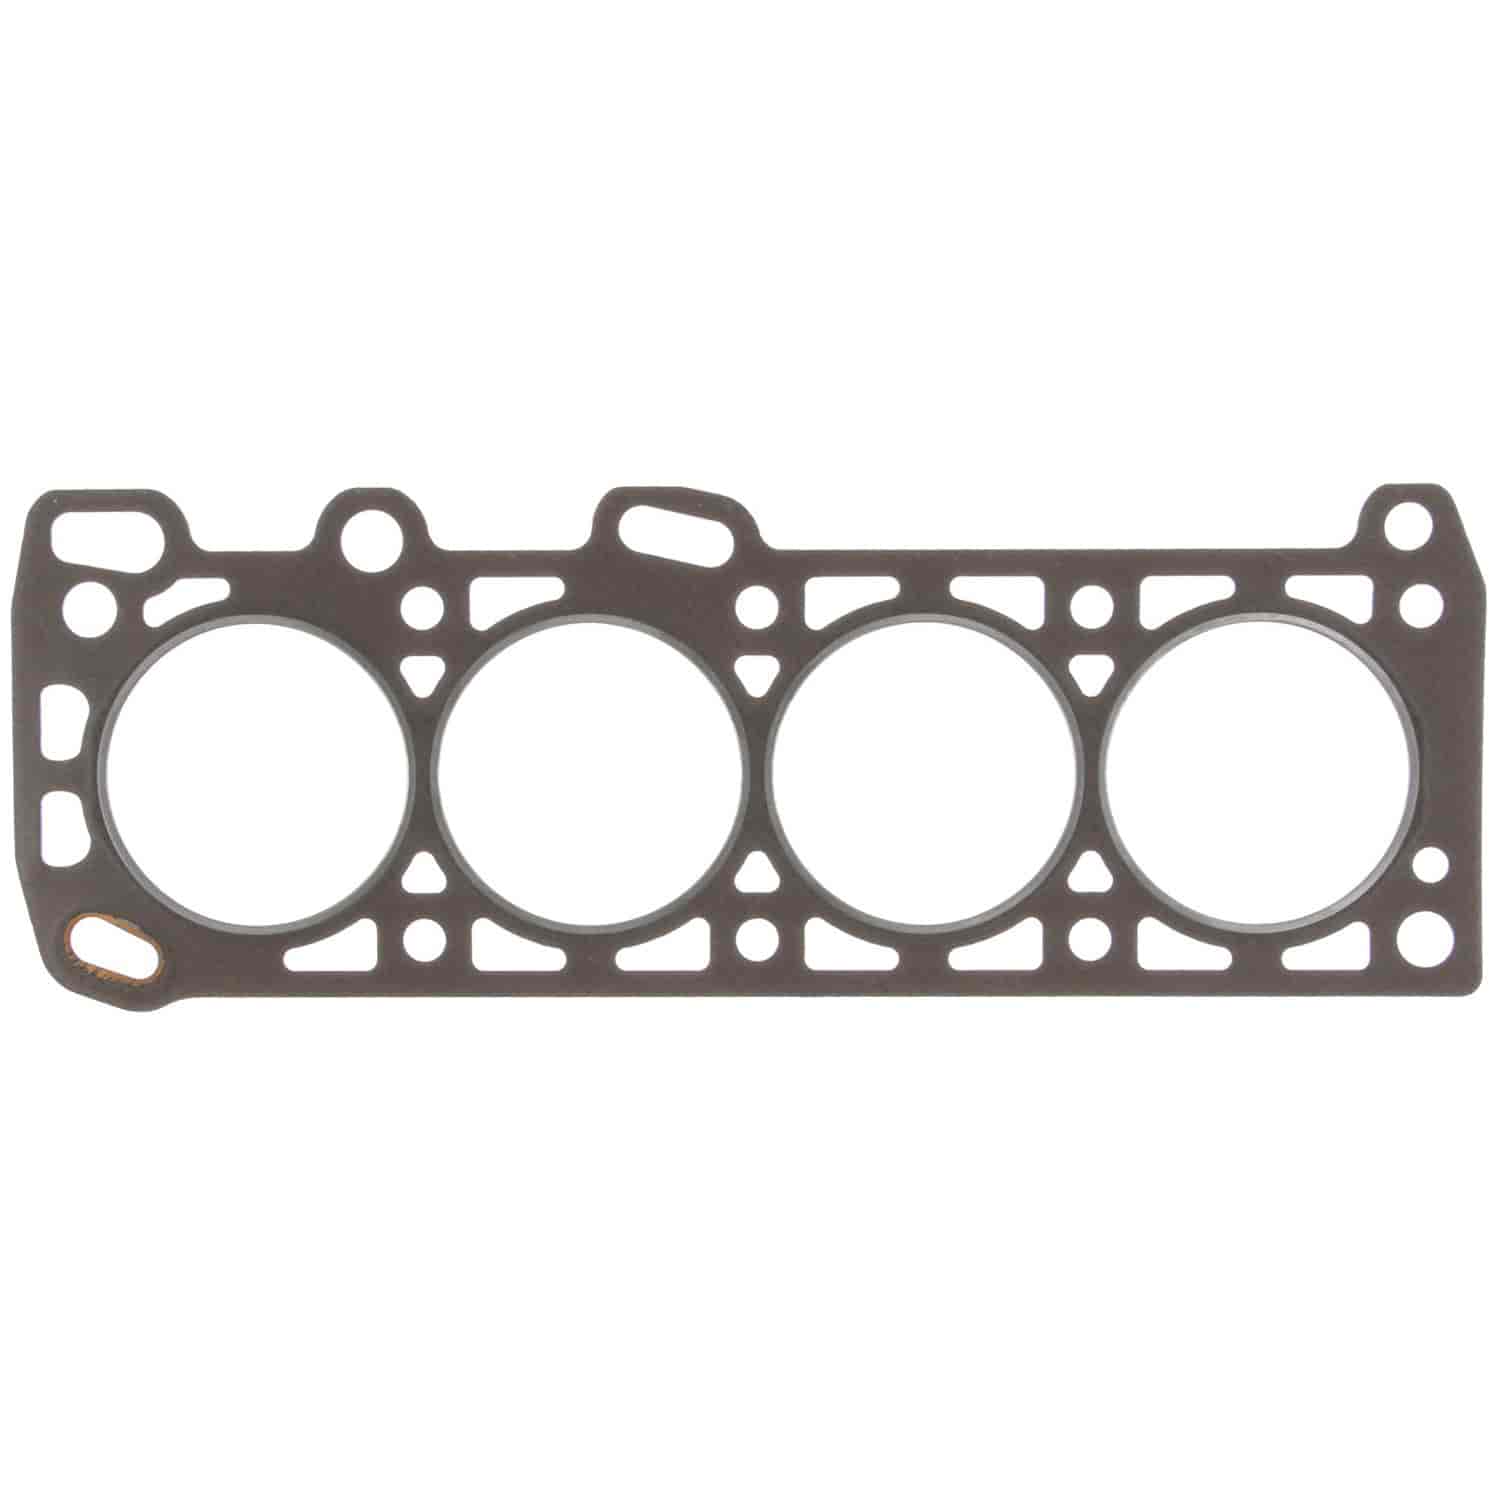 Cylinder Head Gasket Dod-Pass Mit-Pass Ply-Pass 98 1.6L Turbo Eng. Champ Colt Mirage 82-90